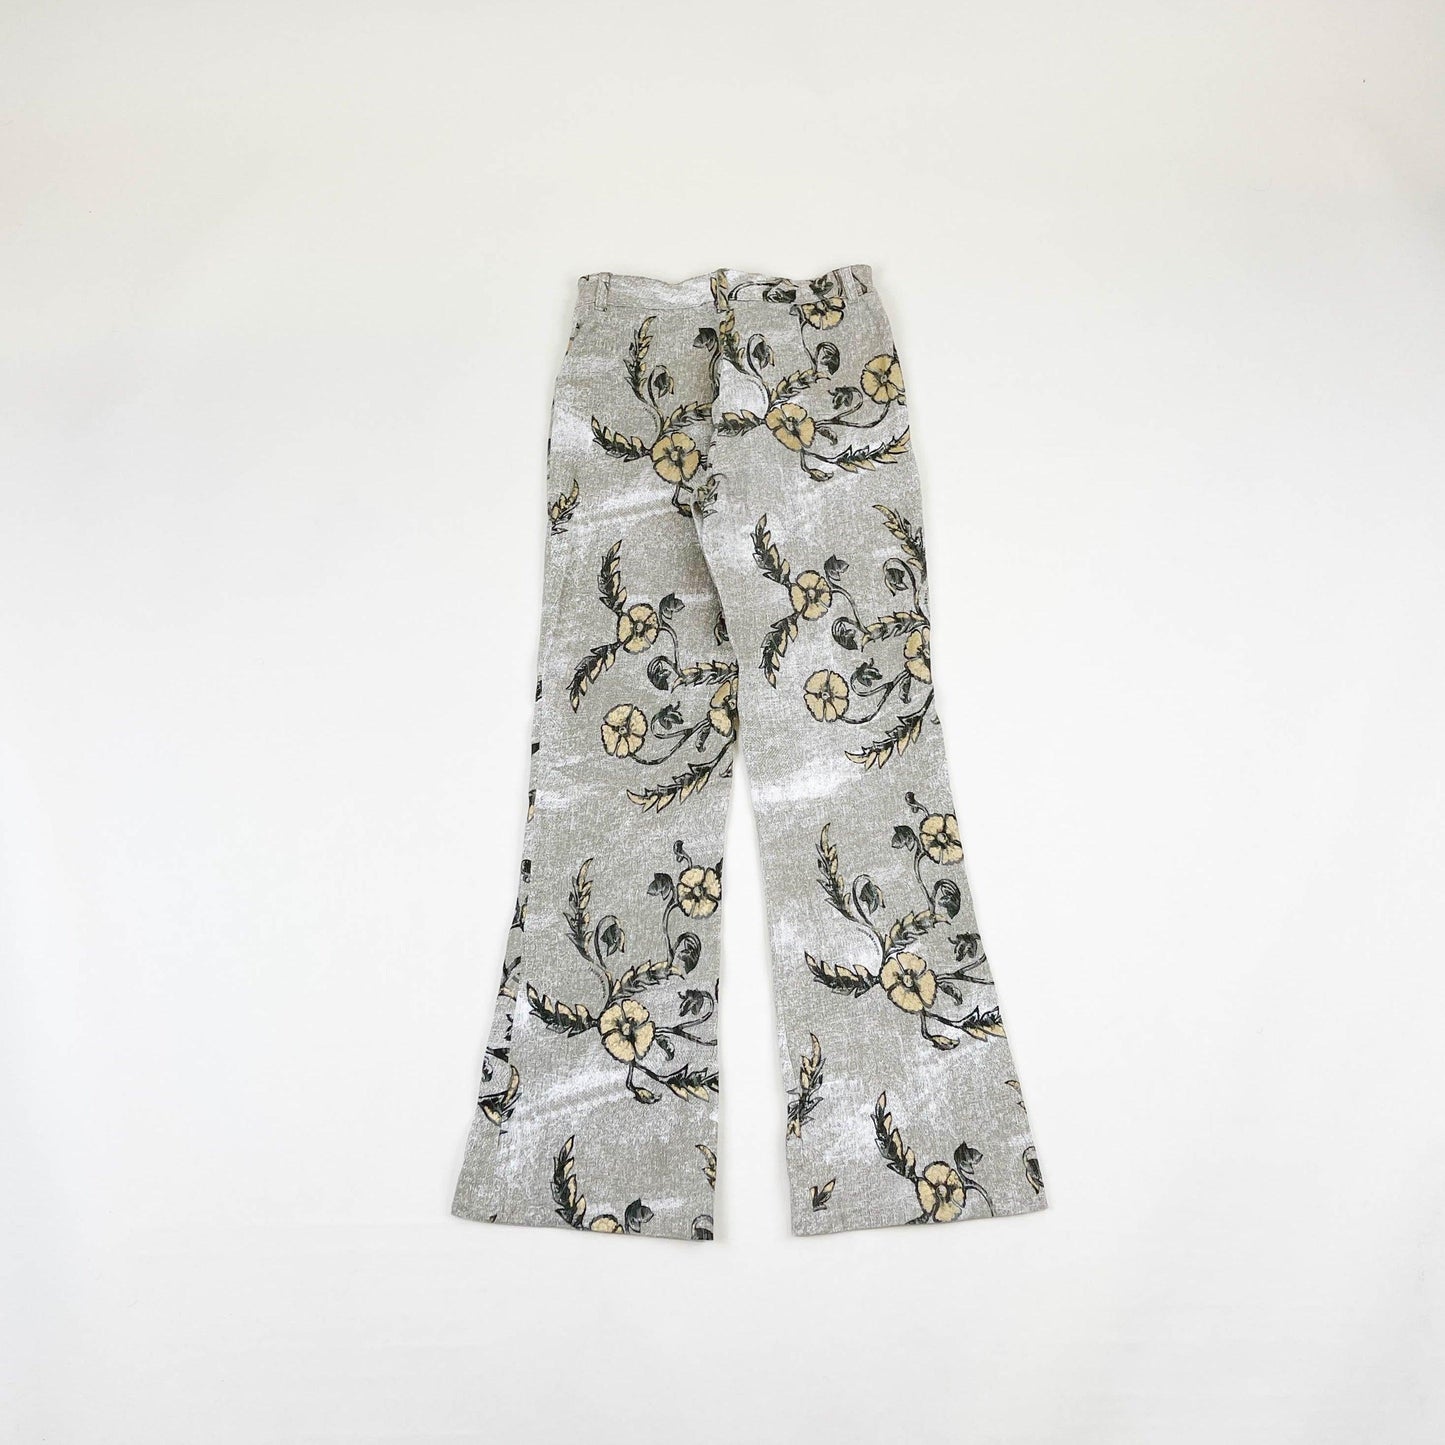 Vintage roccobarocco Trousers - Known Source